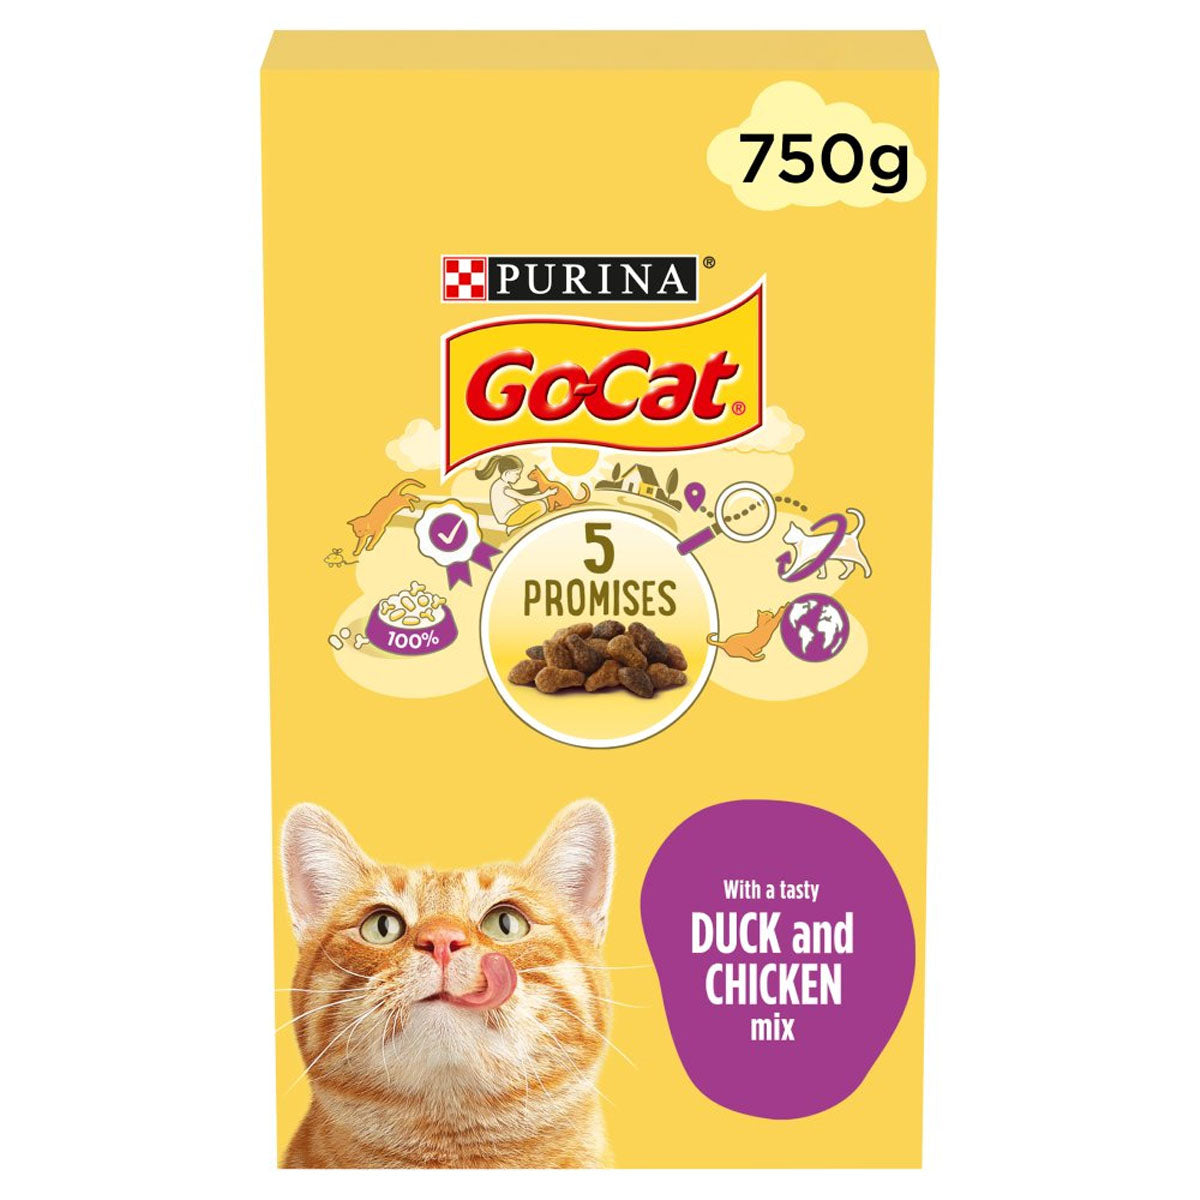 Go-Cat - with a Tasty Duck and Chicken Mix 1+ Years - 750g - Continental Food Store